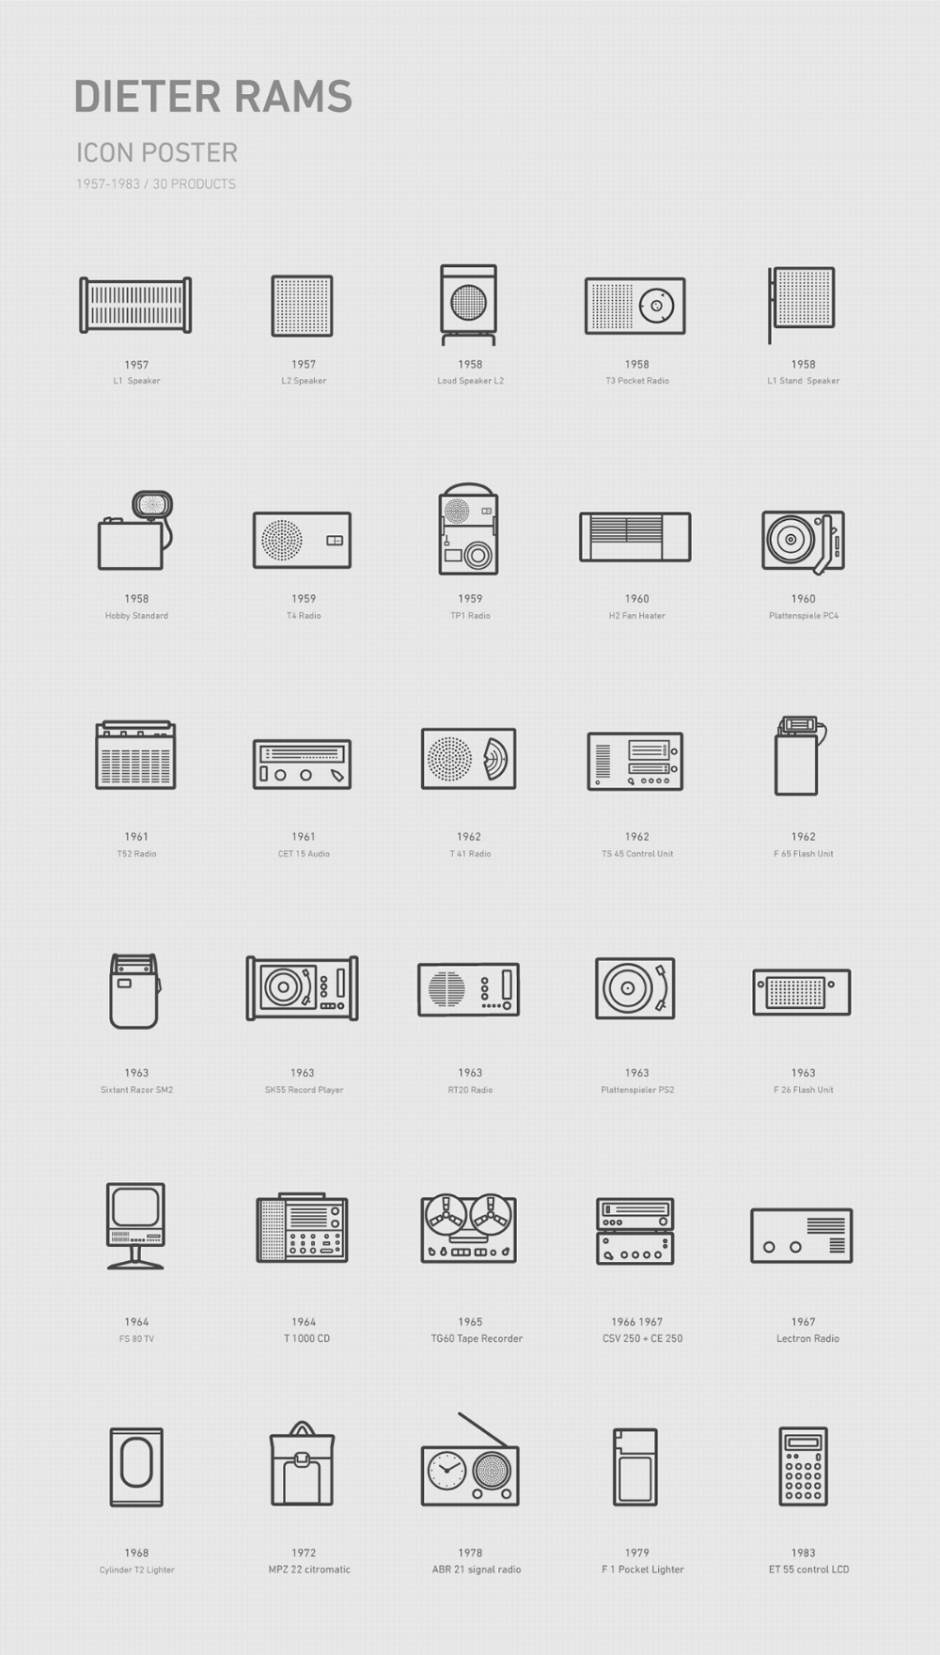 Dieter rams products